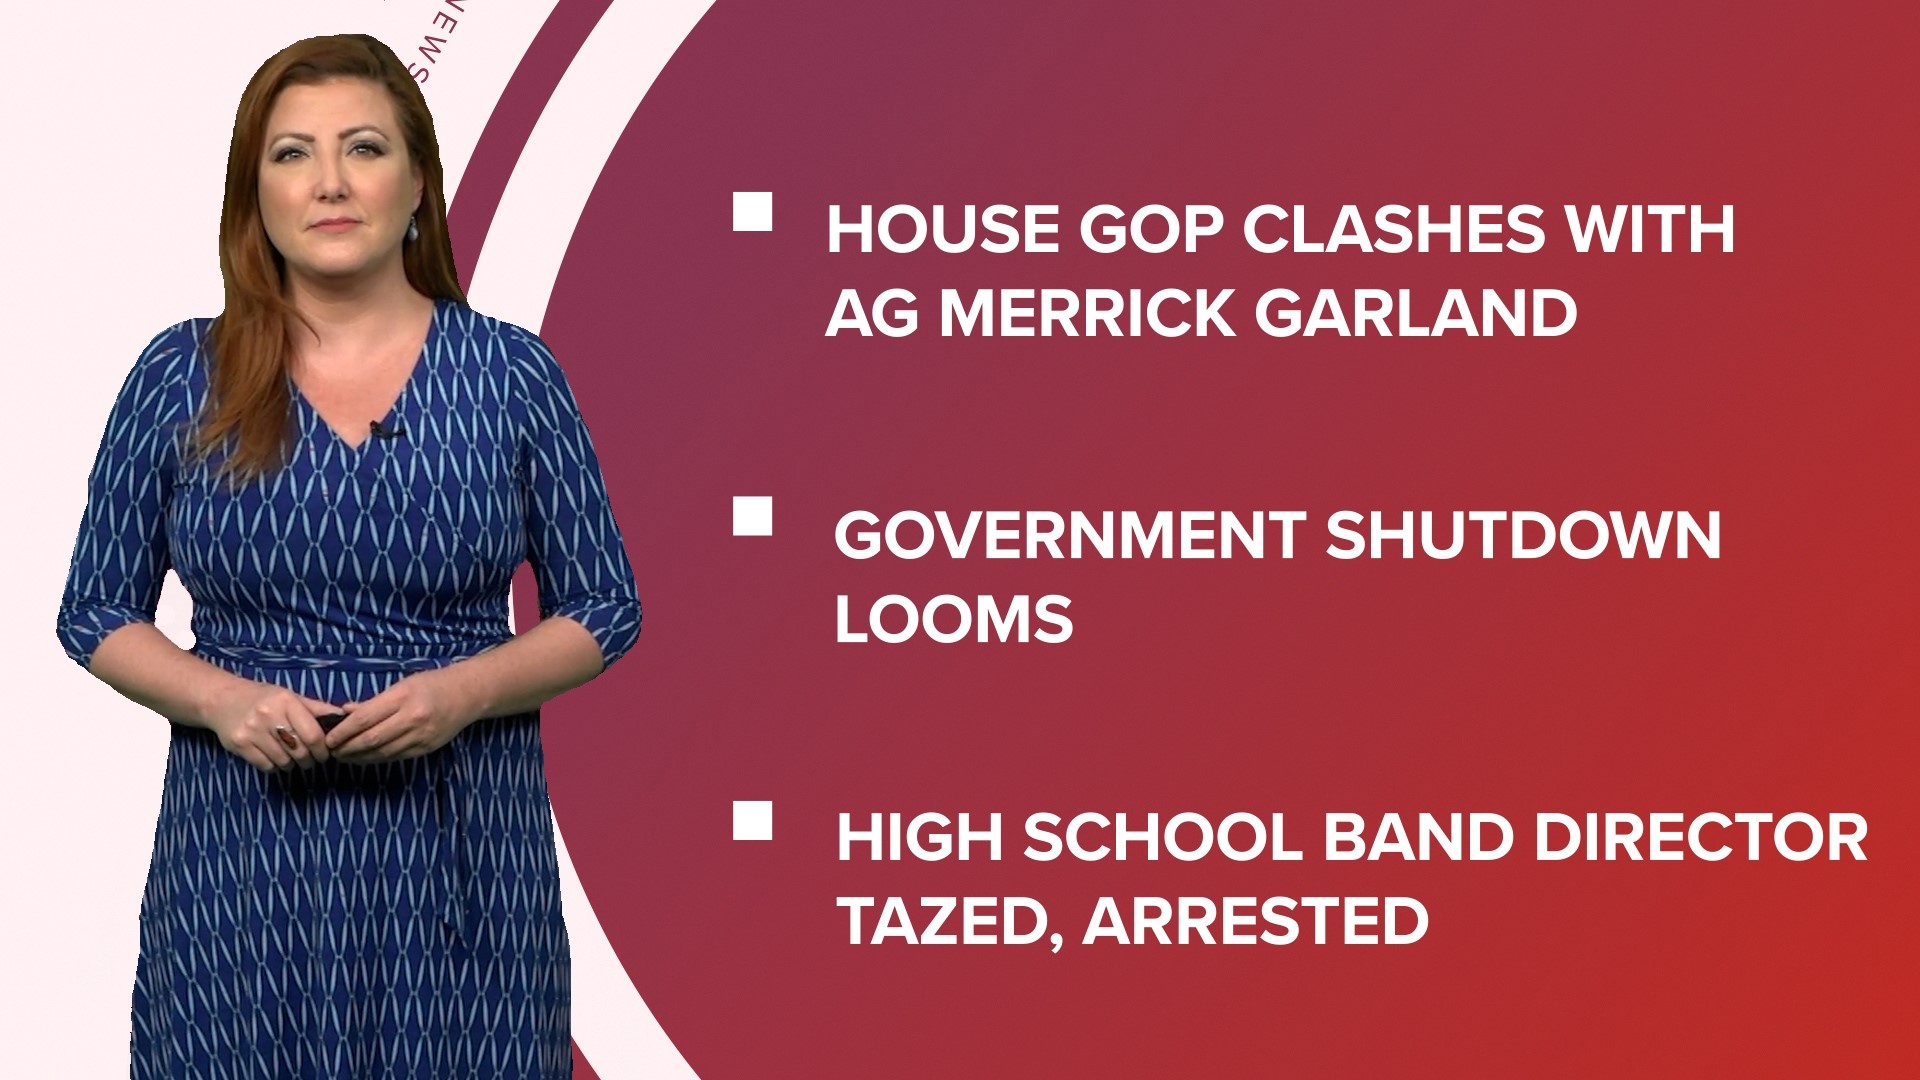 A look at what is happening in the news from House Republicans clashing with AG Merrick Garland to a looming government shutdown and free at-home covid tests.